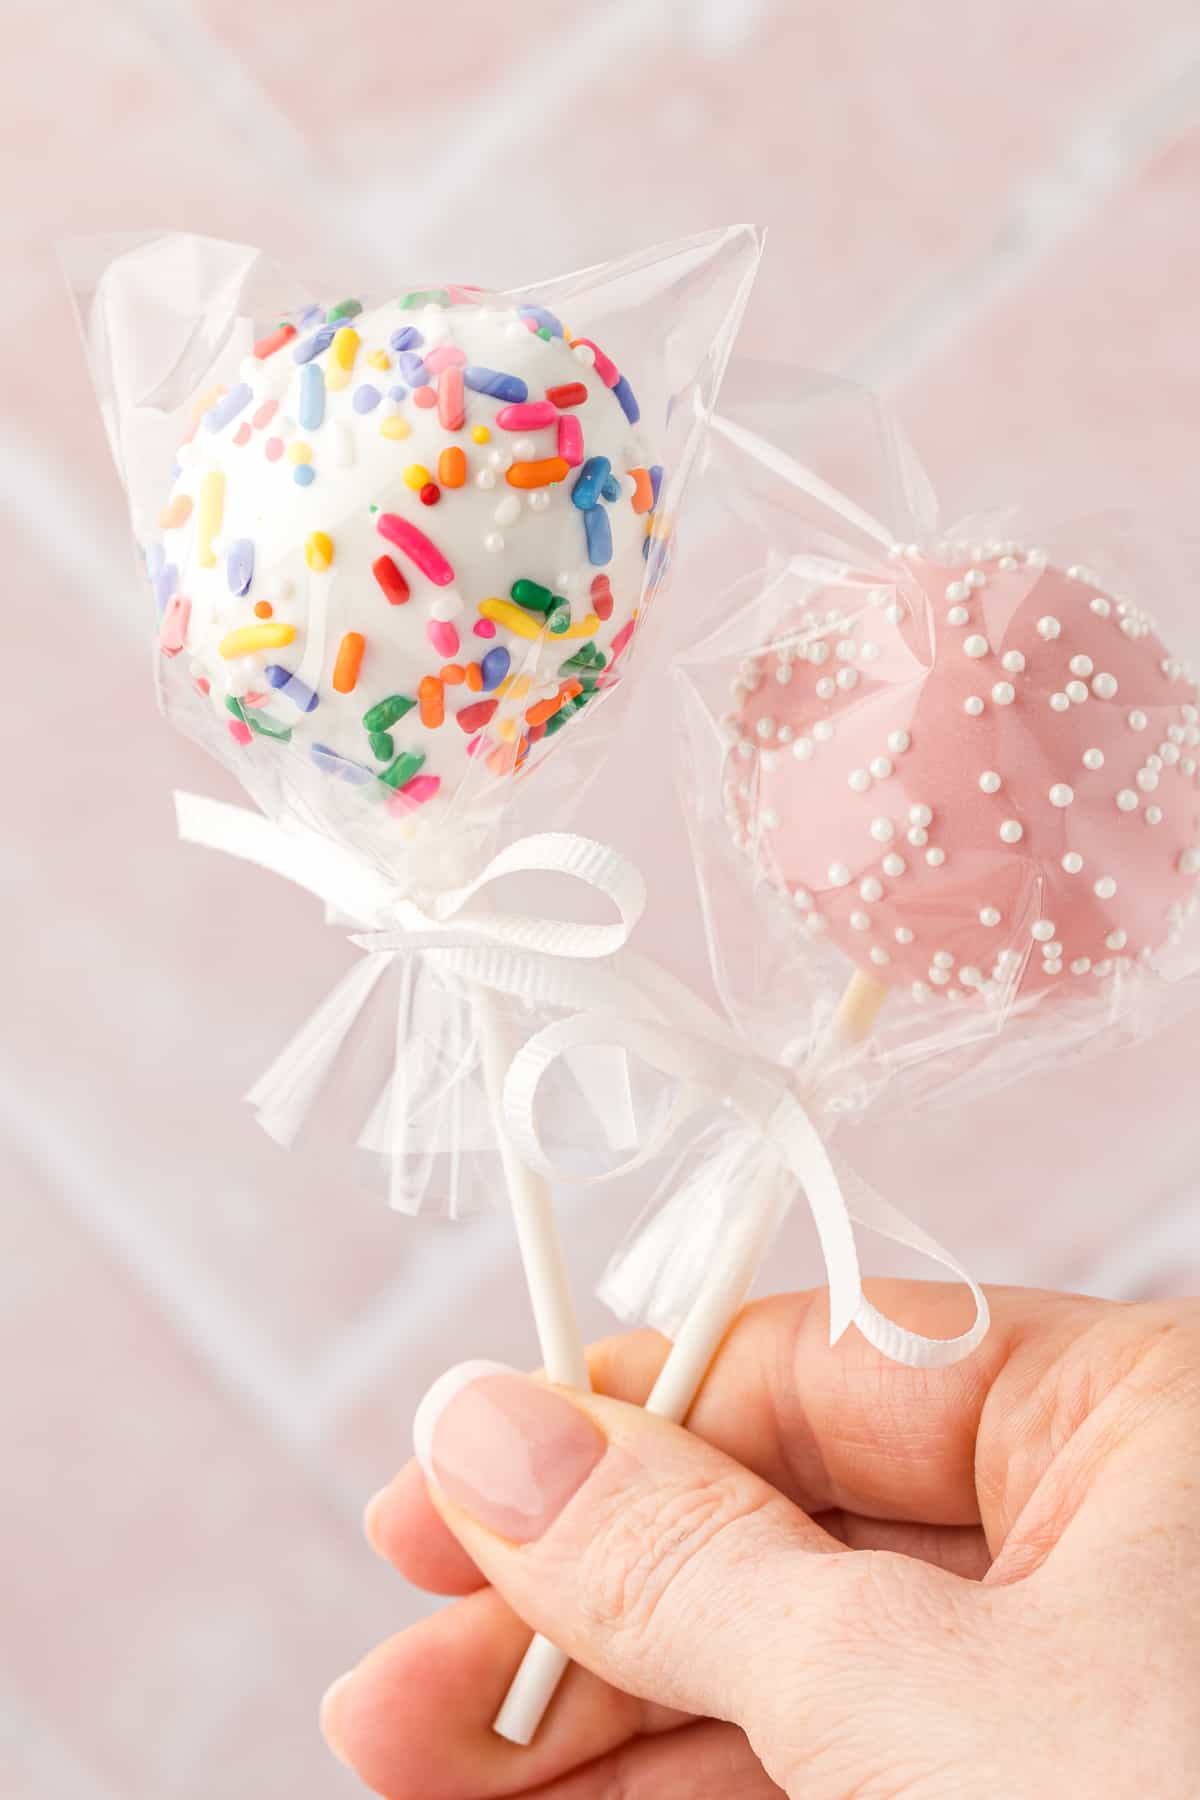 a hand holding two cake pops, one white with rainbow sprinkles and one pink with white sprinkles, both wrapped in plastic and tied with a white ribbon